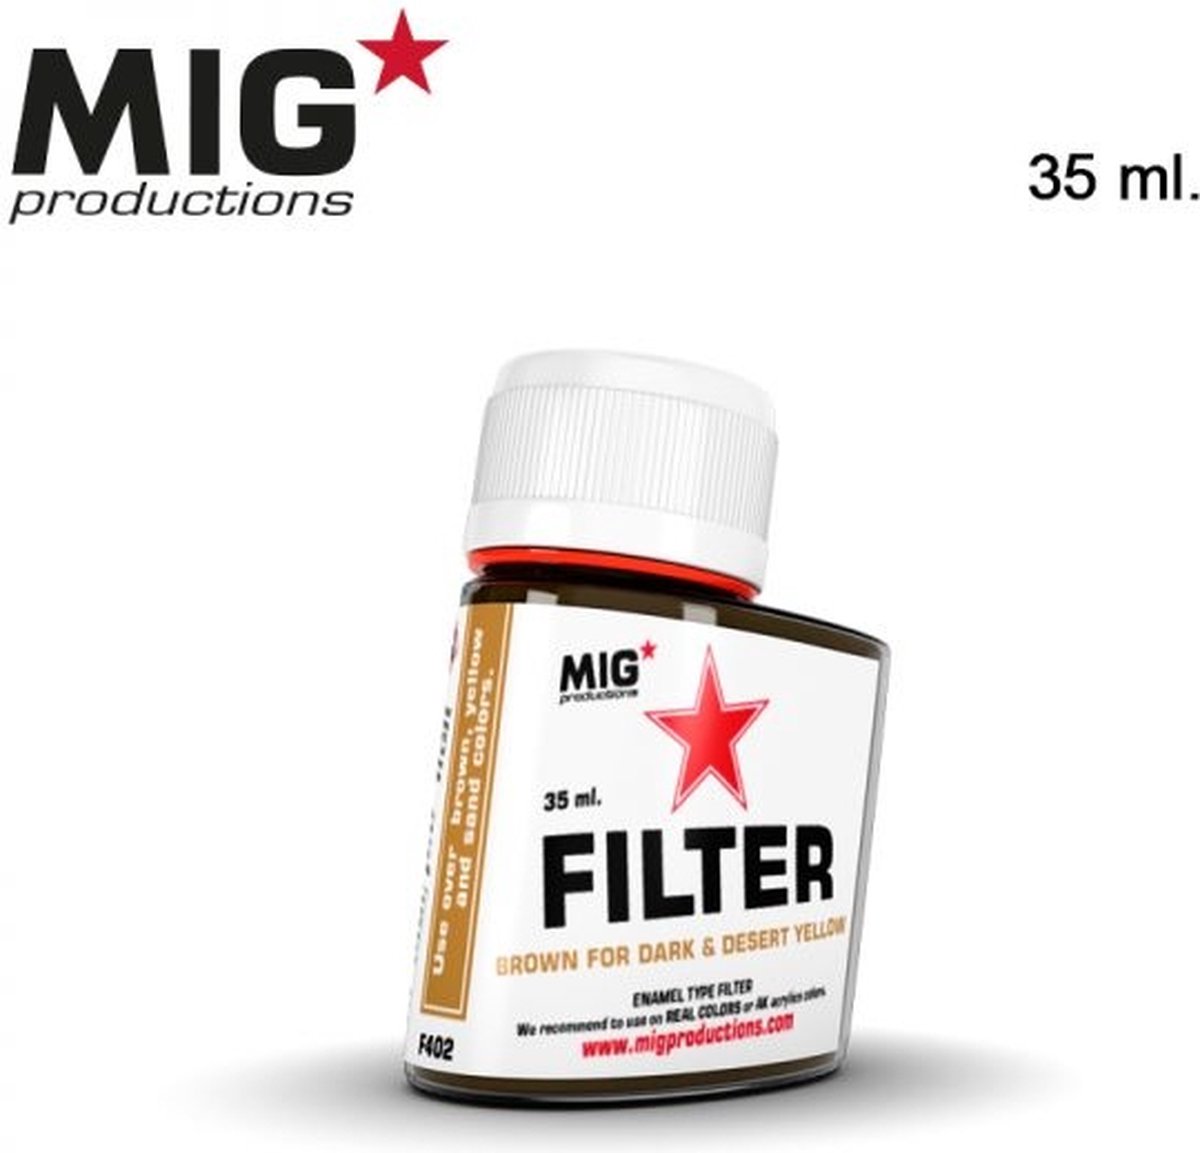 MIG Productions - F402 - Brown Filter for Dark & Desert Yellow - 35ml -